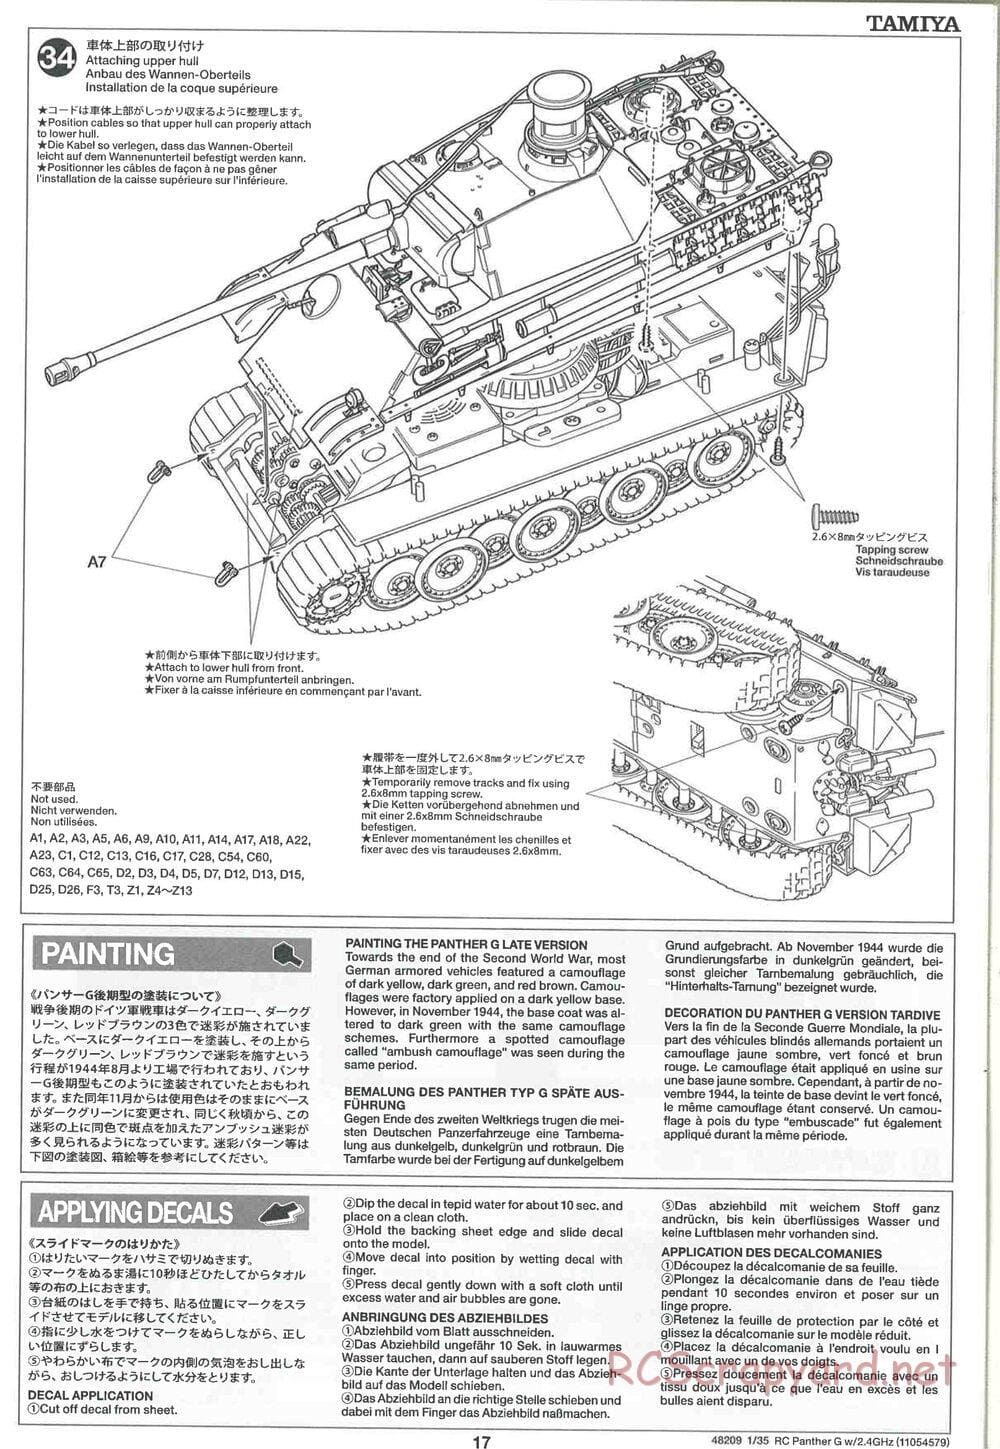 Tamiya - German Panther Type G - Late Version - 1/35 Scale Chassis - Manual - Page 17